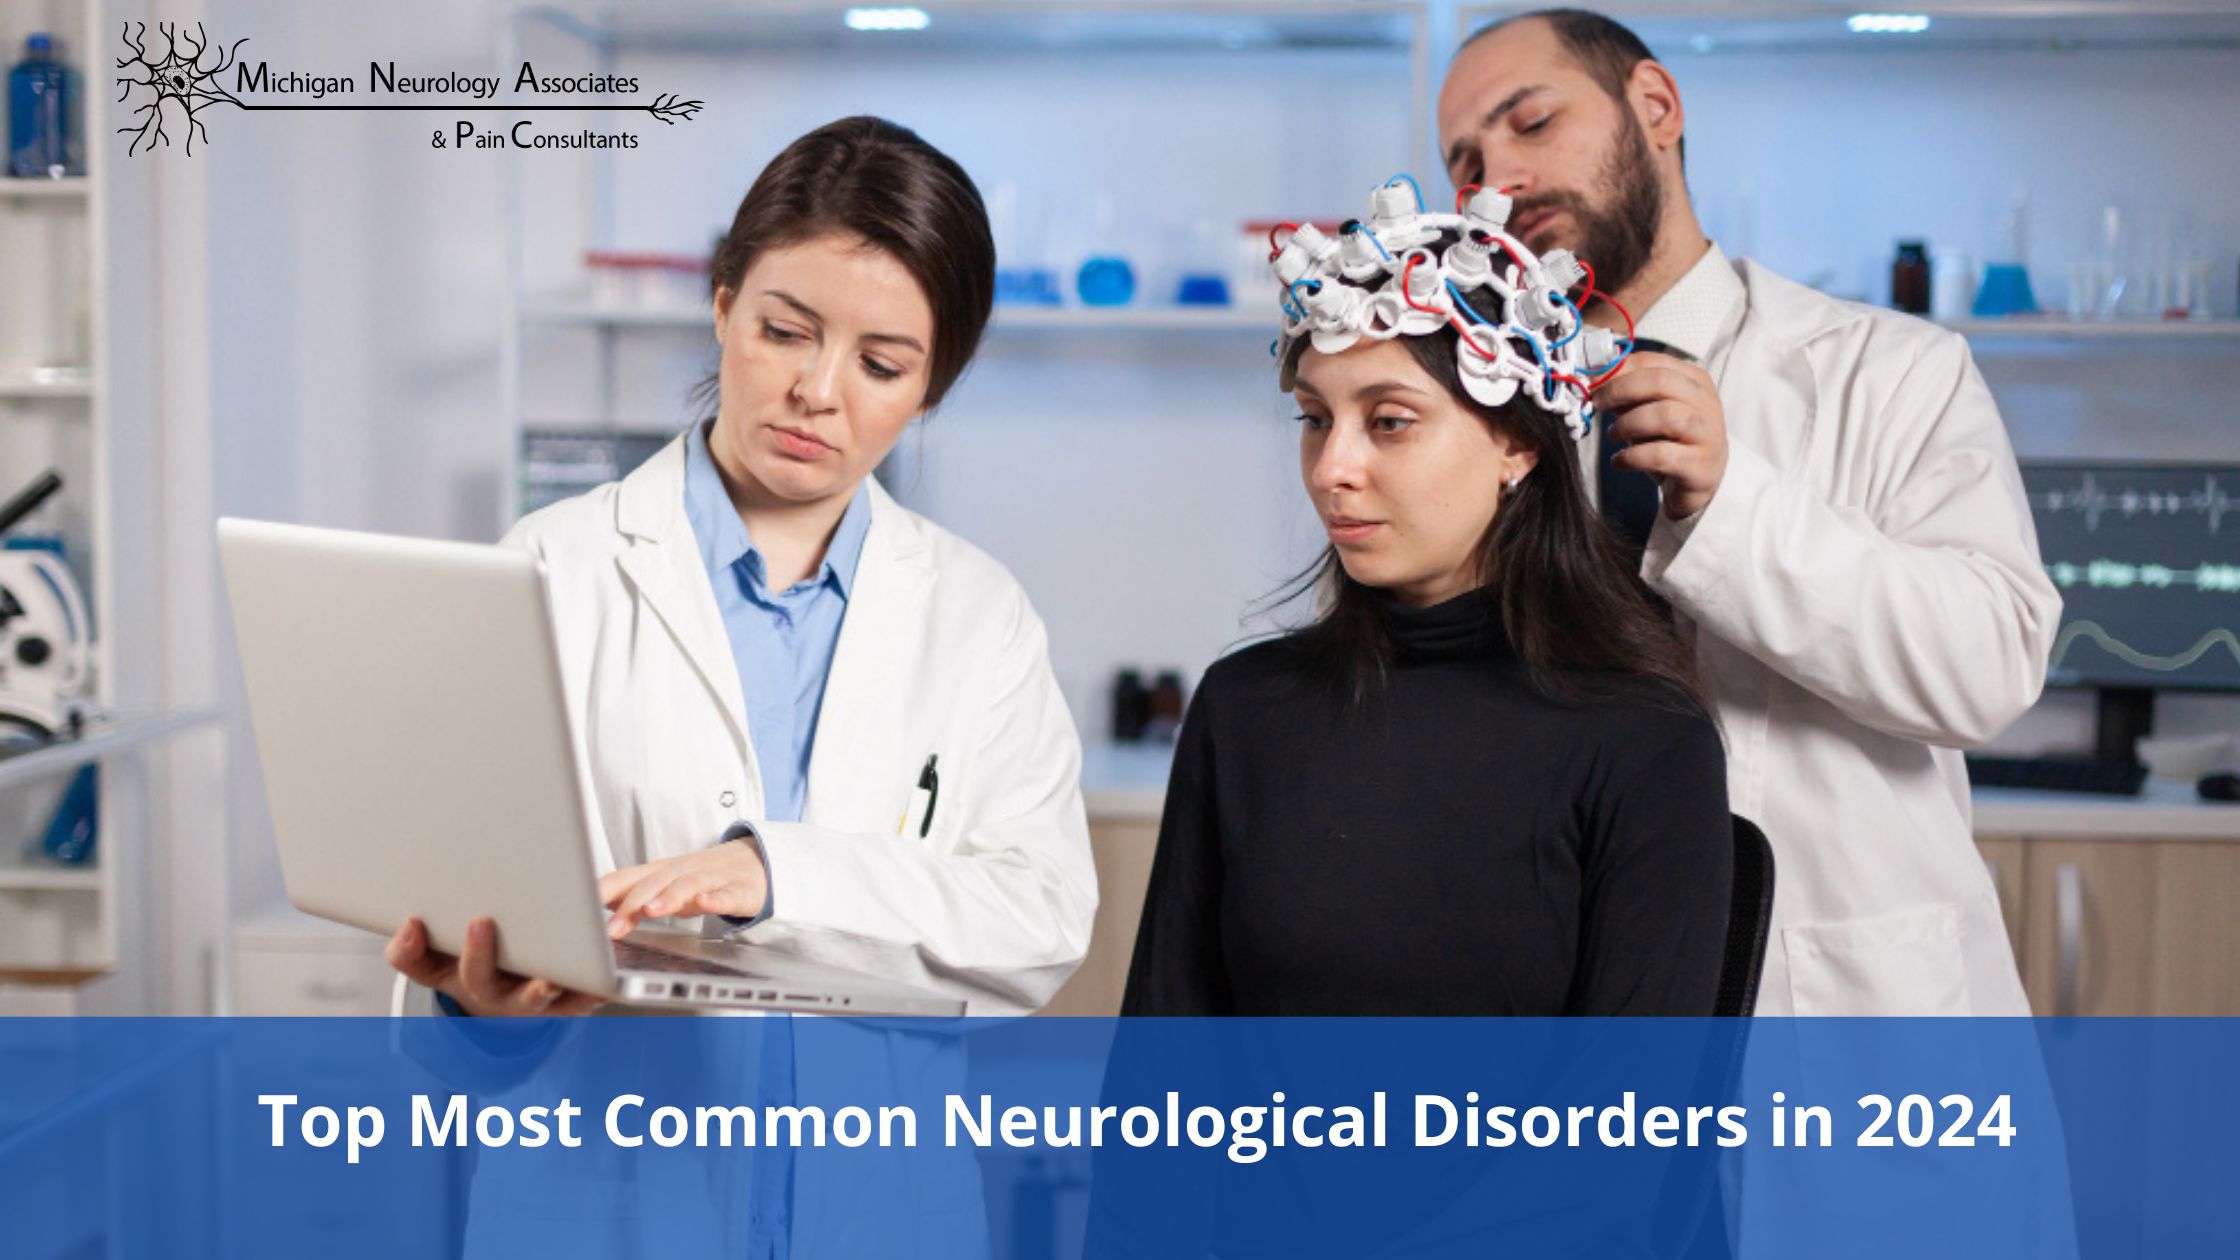 Top Most Common Neurological Disorders in 2024